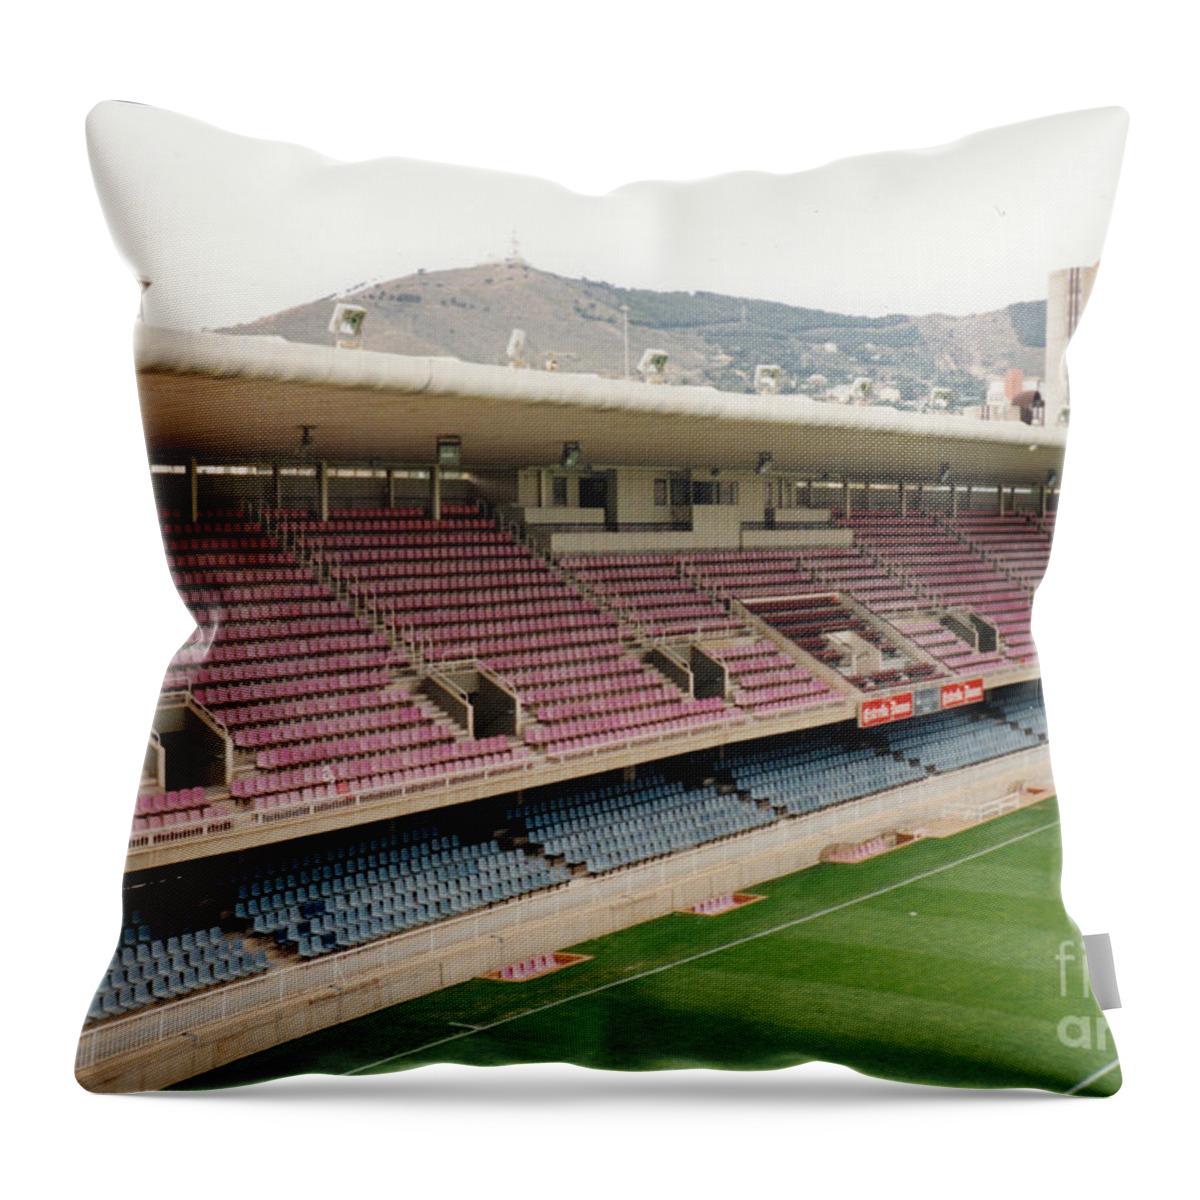 Fc Barcelona Throw Pillow featuring the photograph FC Barcelona - Mini Estadi - West Side by Legendary Football Grounds